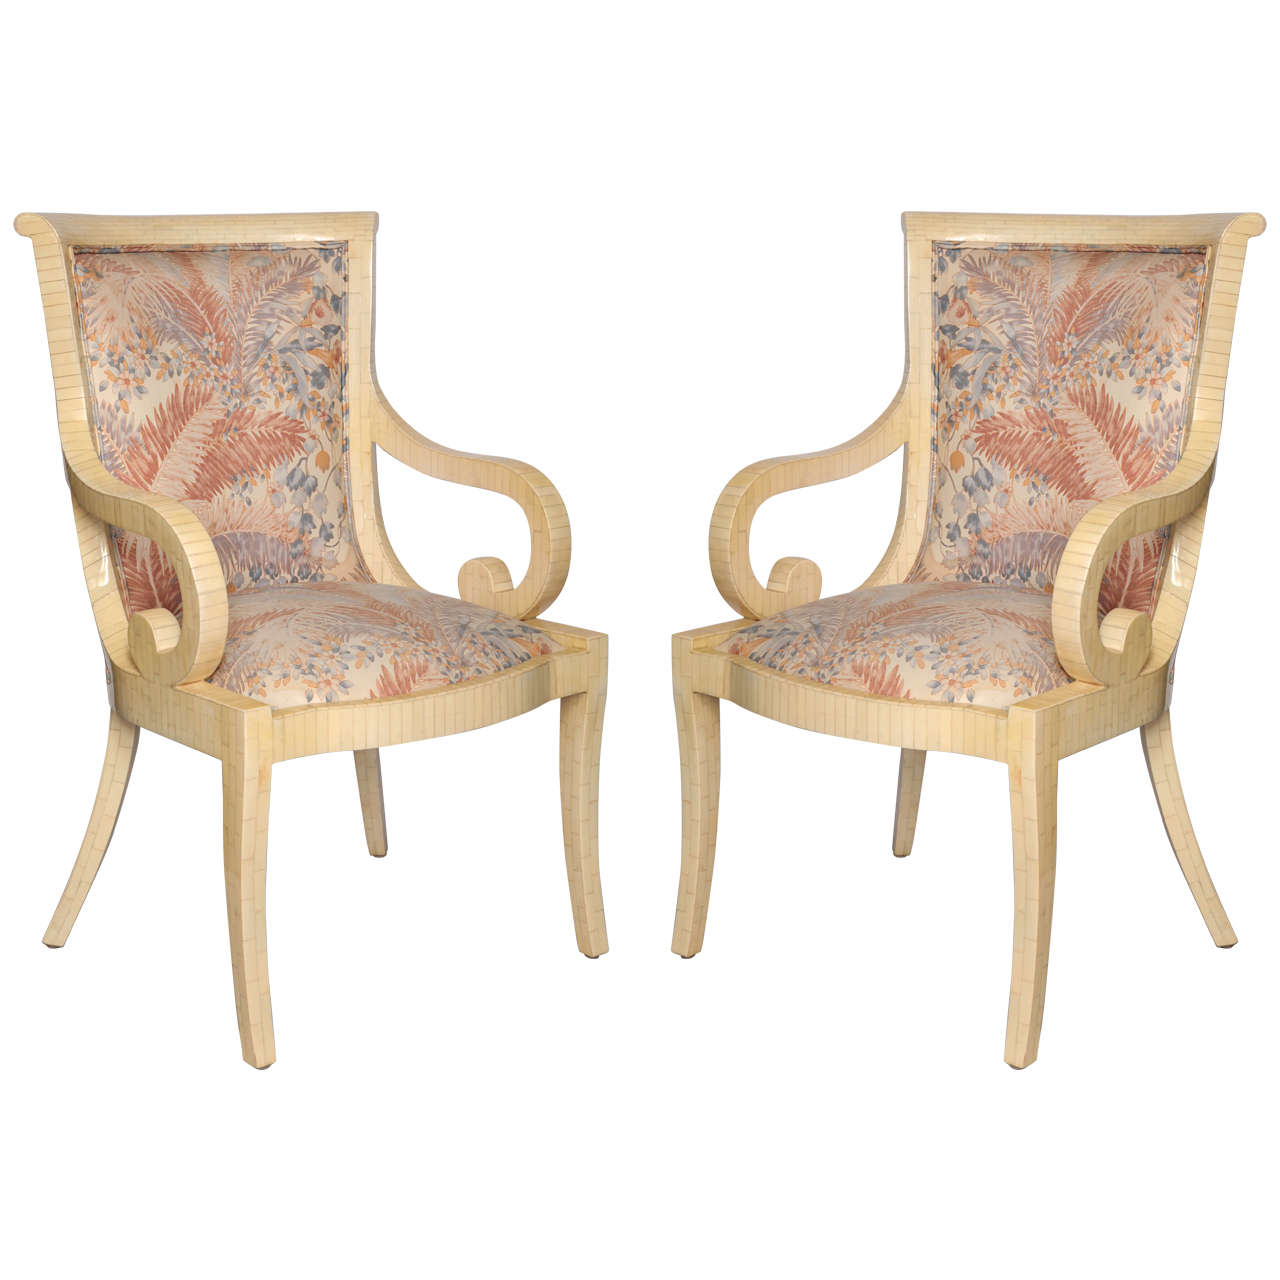 Pair of 1970s Faux Bone Armchairs, American Design, Made in Colombia